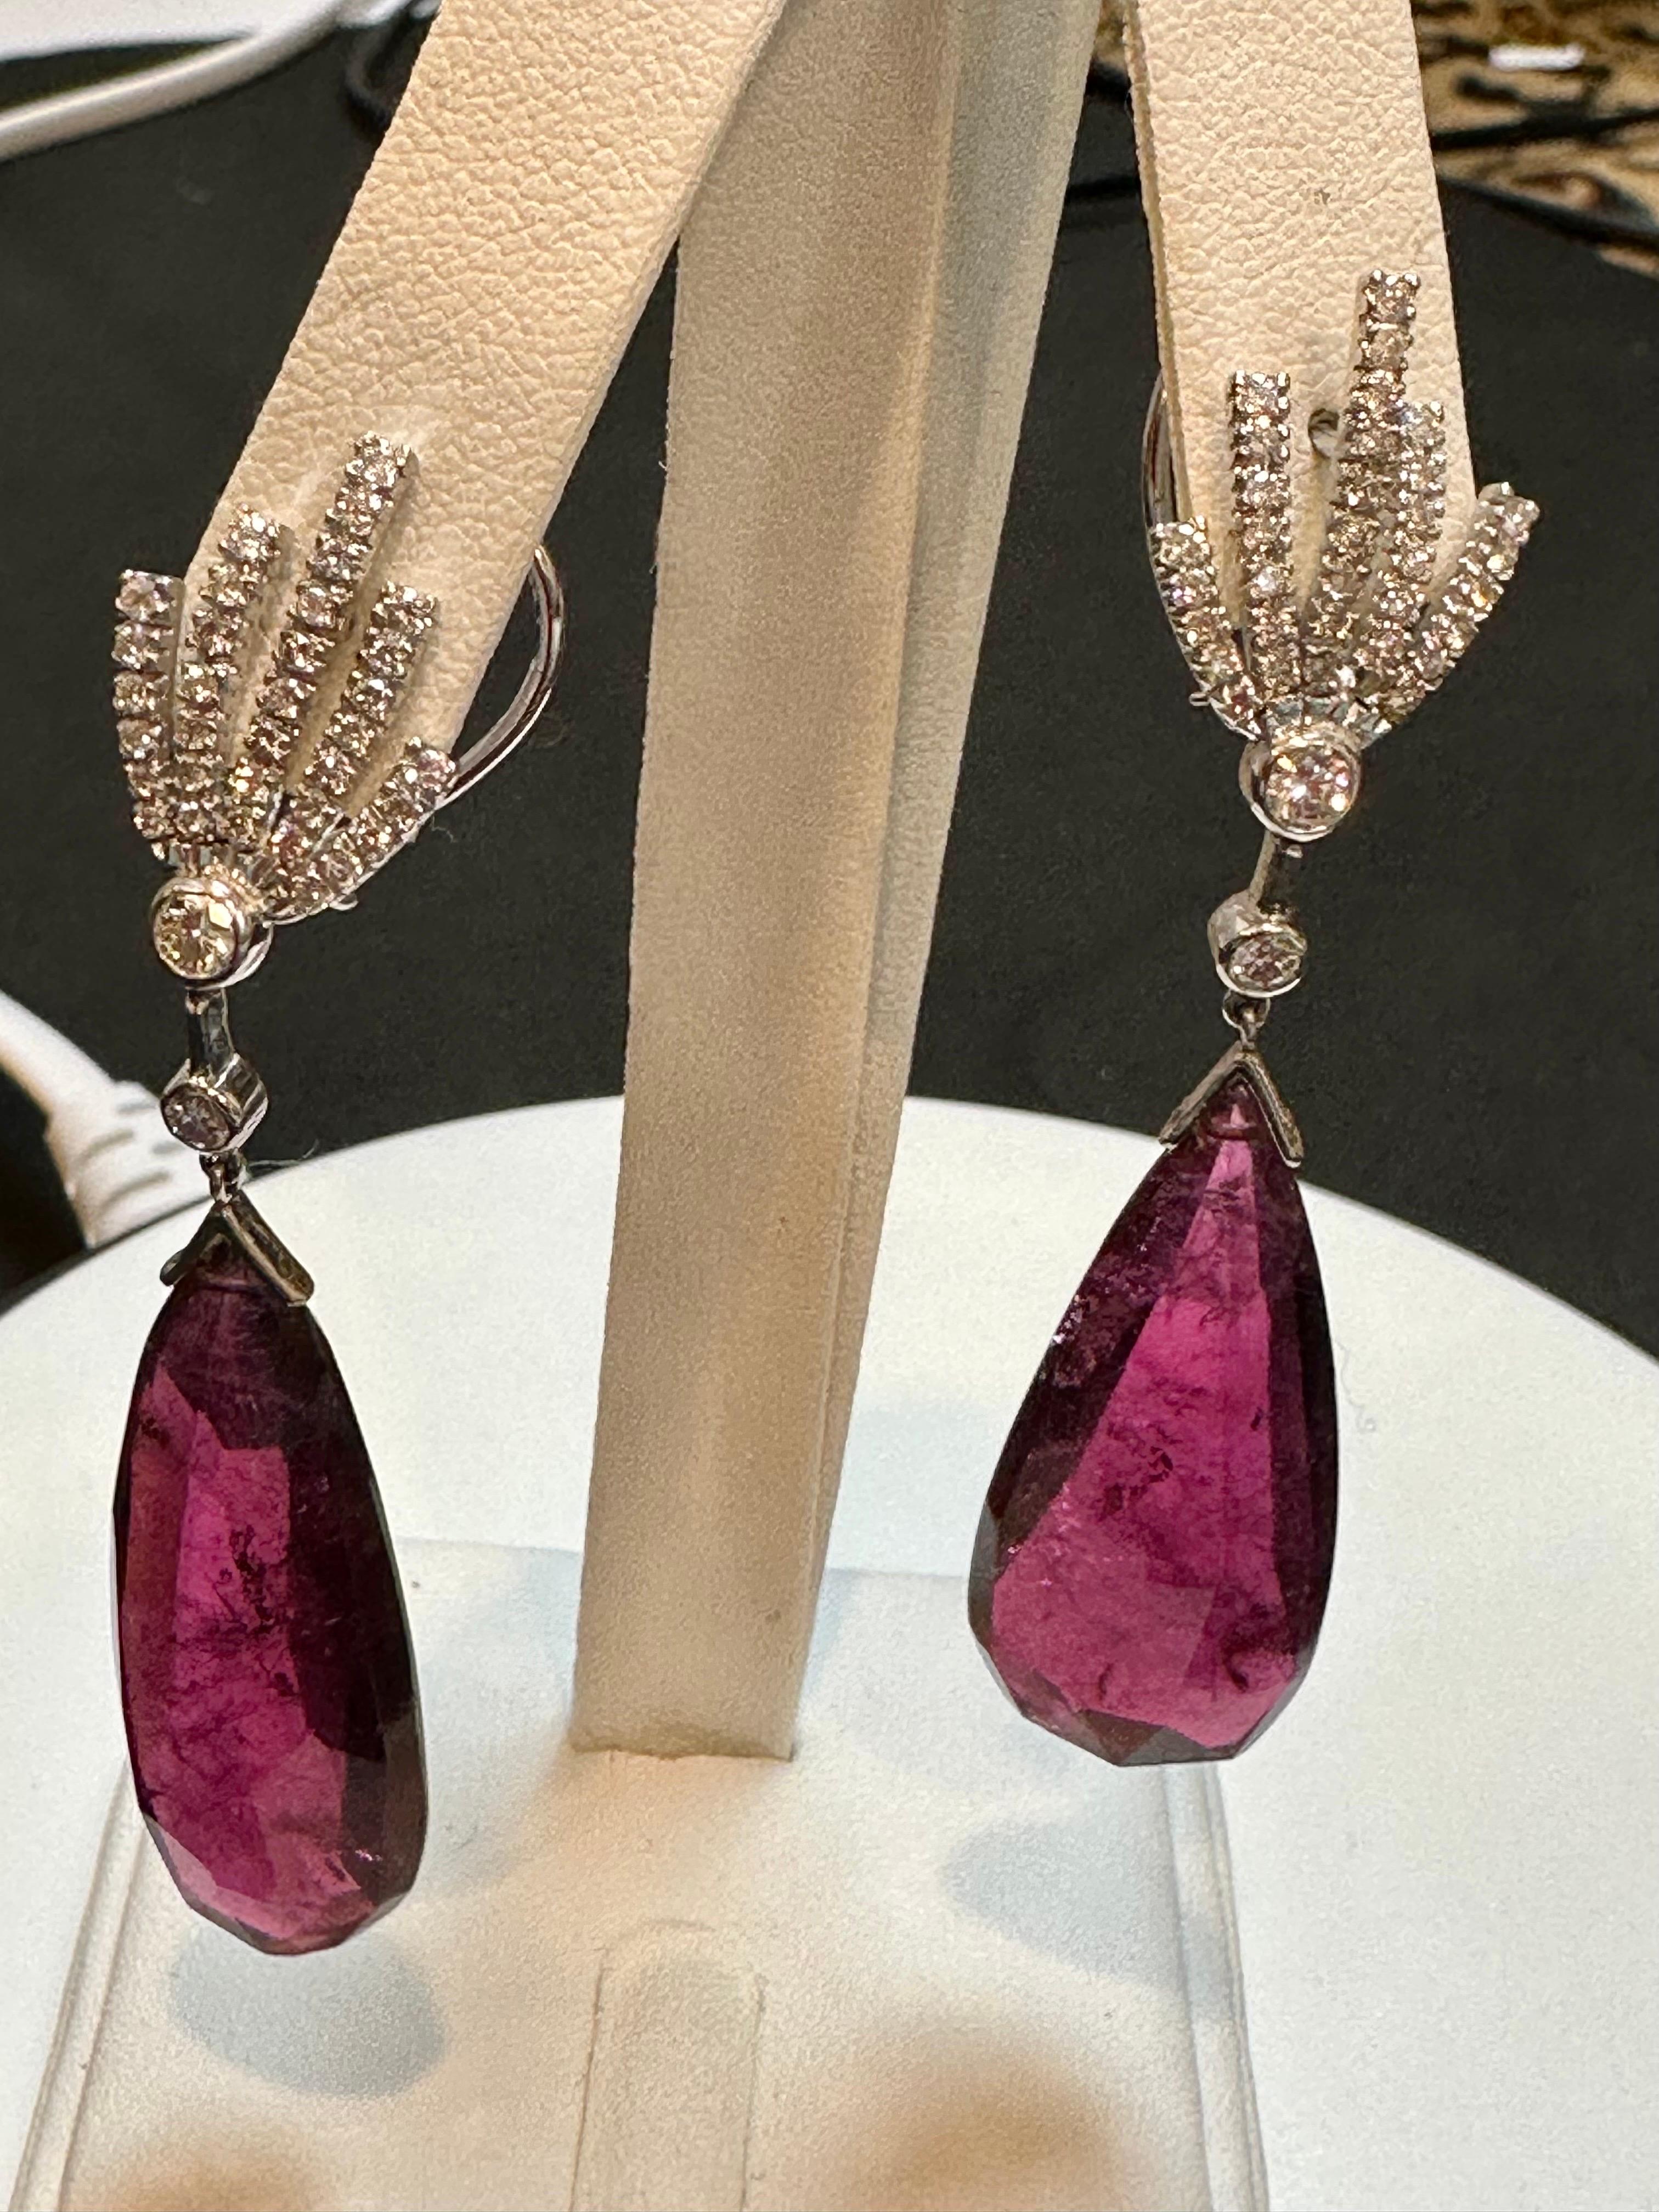 These stunning cocktail earrings are a perfect pair made in 18 karat white gold. The earrings weigh 7 grams and are set with approximately 2 carats of diamonds. They are post earrings with an omega back for secure wearing. The earrings measure 2.6